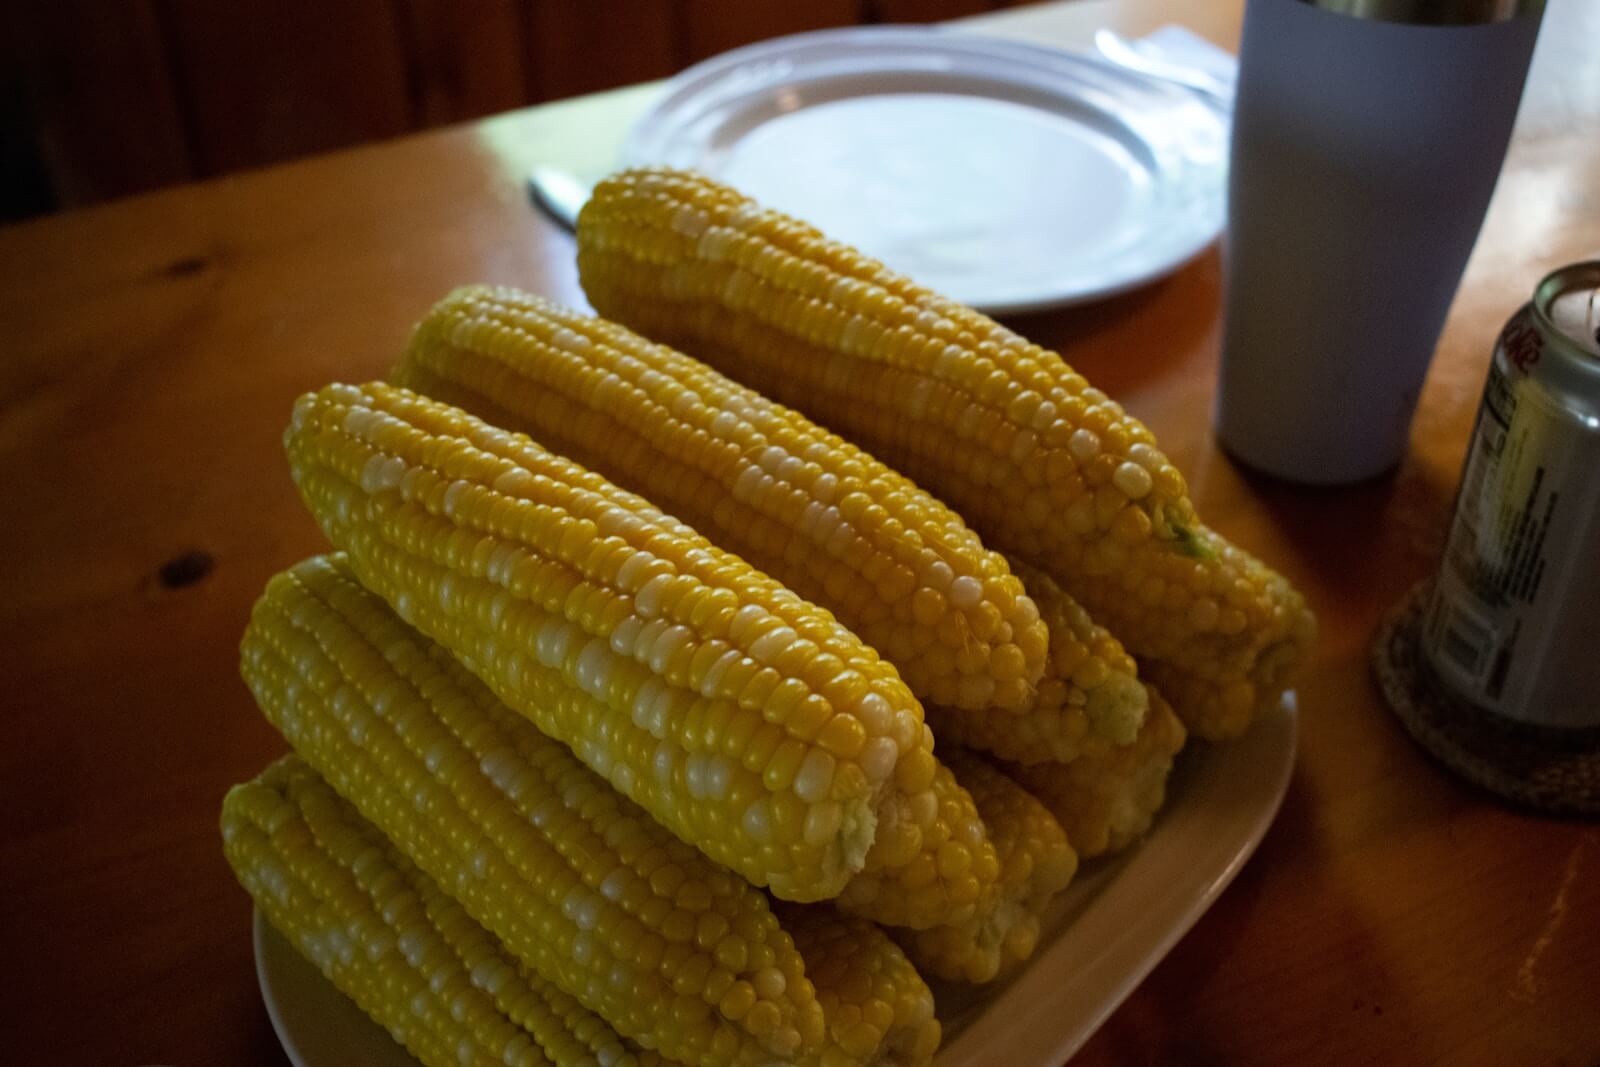 A plate of boiled corn on the cob